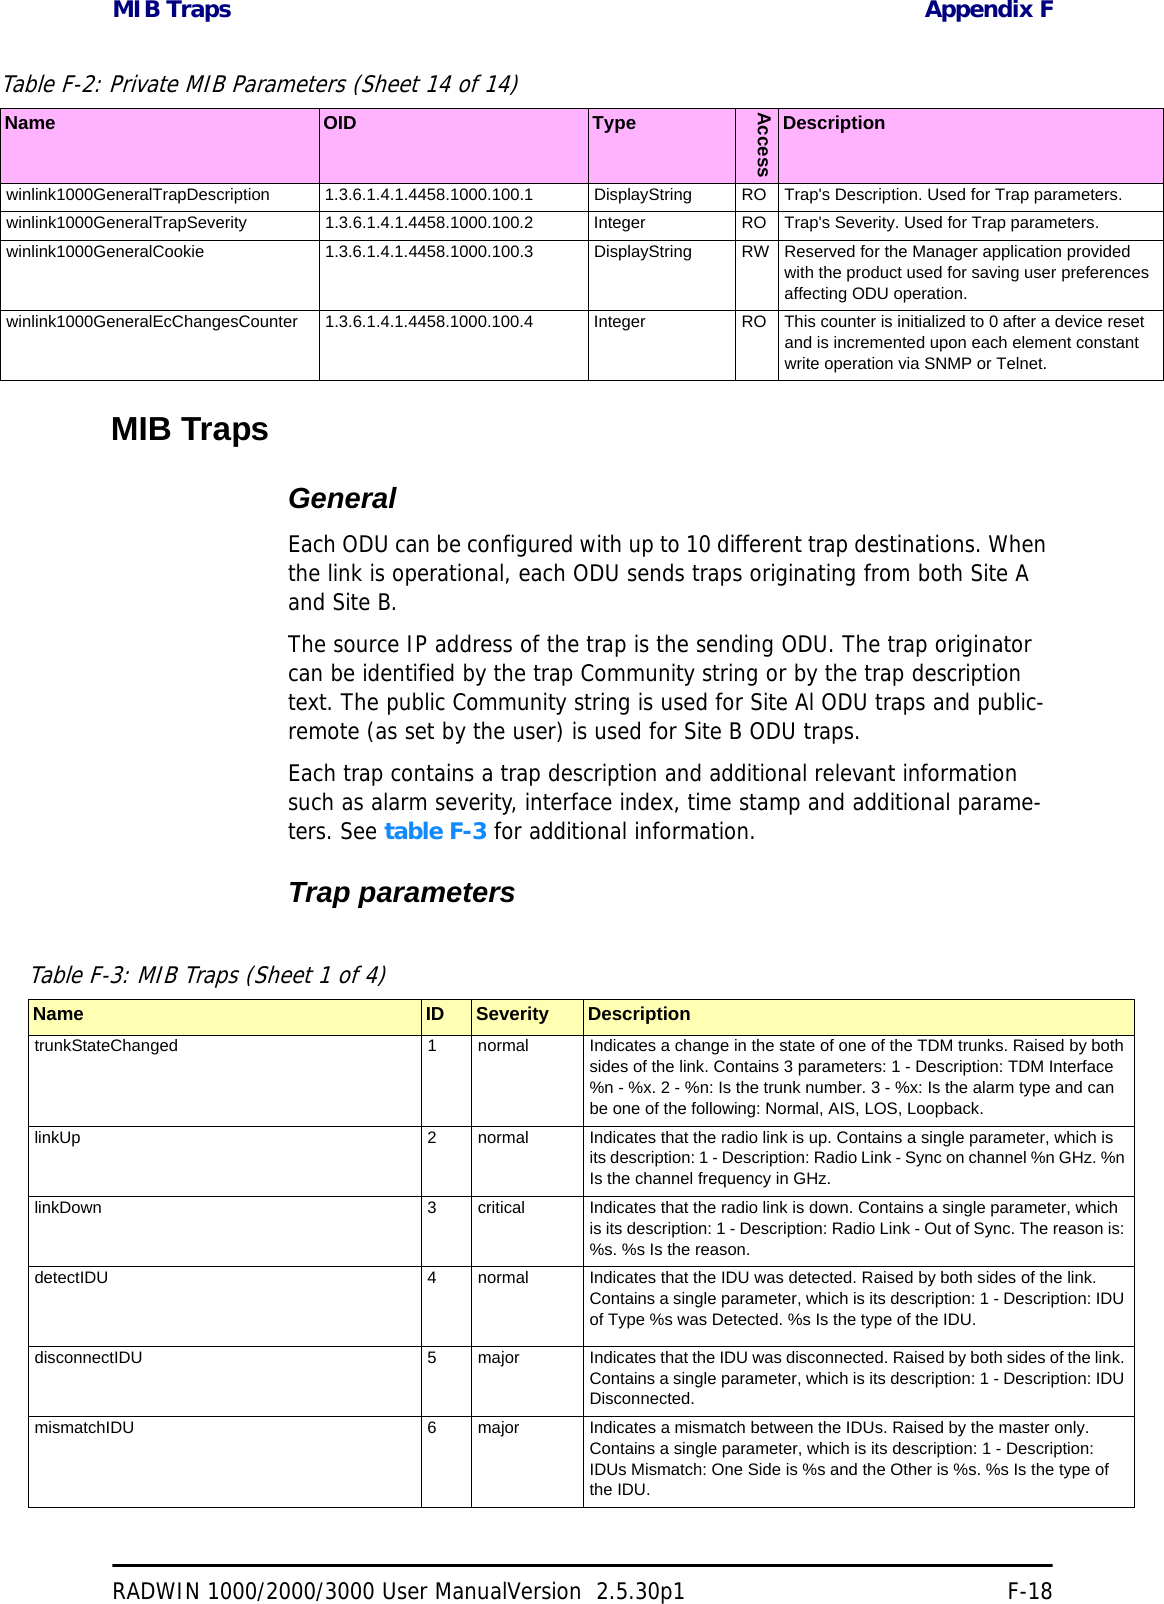 MIB Traps Appendix FRADWIN 1000/2000/3000 User ManualVersion  2.5.30p1 F-18MIB TrapsGeneralEach ODU can be configured with up to 10 different trap destinations. When the link is operational, each ODU sends traps originating from both Site A and Site B.The source IP address of the trap is the sending ODU. The trap originator can be identified by the trap Community string or by the trap description text. The public Community string is used for Site Al ODU traps and public-remote (as set by the user) is used for Site B ODU traps. Each trap contains a trap description and additional relevant information such as alarm severity, interface index, time stamp and additional parame-ters. See table F-3 for additional information. Trap parameterswinlink1000GeneralTrapDescription 1.3.6.1.4.1.4458.1000.100.1 DisplayString RO Trap&apos;s Description. Used for Trap parameters. winlink1000GeneralTrapSeverity 1.3.6.1.4.1.4458.1000.100.2 Integer RO Trap&apos;s Severity. Used for Trap parameters. winlink1000GeneralCookie 1.3.6.1.4.1.4458.1000.100.3 DisplayString RW Reserved for the Manager application provided with the product used for saving user preferences affecting ODU operation. winlink1000GeneralEcChangesCounter 1.3.6.1.4.1.4458.1000.100.4 Integer RO This counter is initialized to 0 after a device reset and is incremented upon each element constant write operation via SNMP or Telnet. Table F-3: MIB Traps (Sheet 1 of 4)Name ID Severity DescriptiontrunkStateChanged 1 normal Indicates a change in the state of one of the TDM trunks. Raised by both sides of the link. Contains 3 parameters: 1 - Description: TDM Interface %n - %x. 2 - %n: Is the trunk number. 3 - %x: Is the alarm type and can be one of the following: Normal, AIS, LOS, Loopback. linkUp 2 normal Indicates that the radio link is up. Contains a single parameter, which is its description: 1 - Description: Radio Link - Sync on channel %n GHz. %n Is the channel frequency in GHz. linkDown 3 critical Indicates that the radio link is down. Contains a single parameter, which is its description: 1 - Description: Radio Link - Out of Sync. The reason is: %s. %s Is the reason. detectIDU 4 normal Indicates that the IDU was detected. Raised by both sides of the link. Contains a single parameter, which is its description: 1 - Description: IDU of Type %s was Detected. %s Is the type of the IDU. disconnectIDU 5 major Indicates that the IDU was disconnected. Raised by both sides of the link. Contains a single parameter, which is its description: 1 - Description: IDU Disconnected. mismatchIDU 6 major Indicates a mismatch between the IDUs. Raised by the master only. Contains a single parameter, which is its description: 1 - Description: IDUs Mismatch: One Side is %s and the Other is %s. %s Is the type of the IDU. Table F-2: Private MIB Parameters (Sheet 14 of 14)Name OID TypeAccessDescription